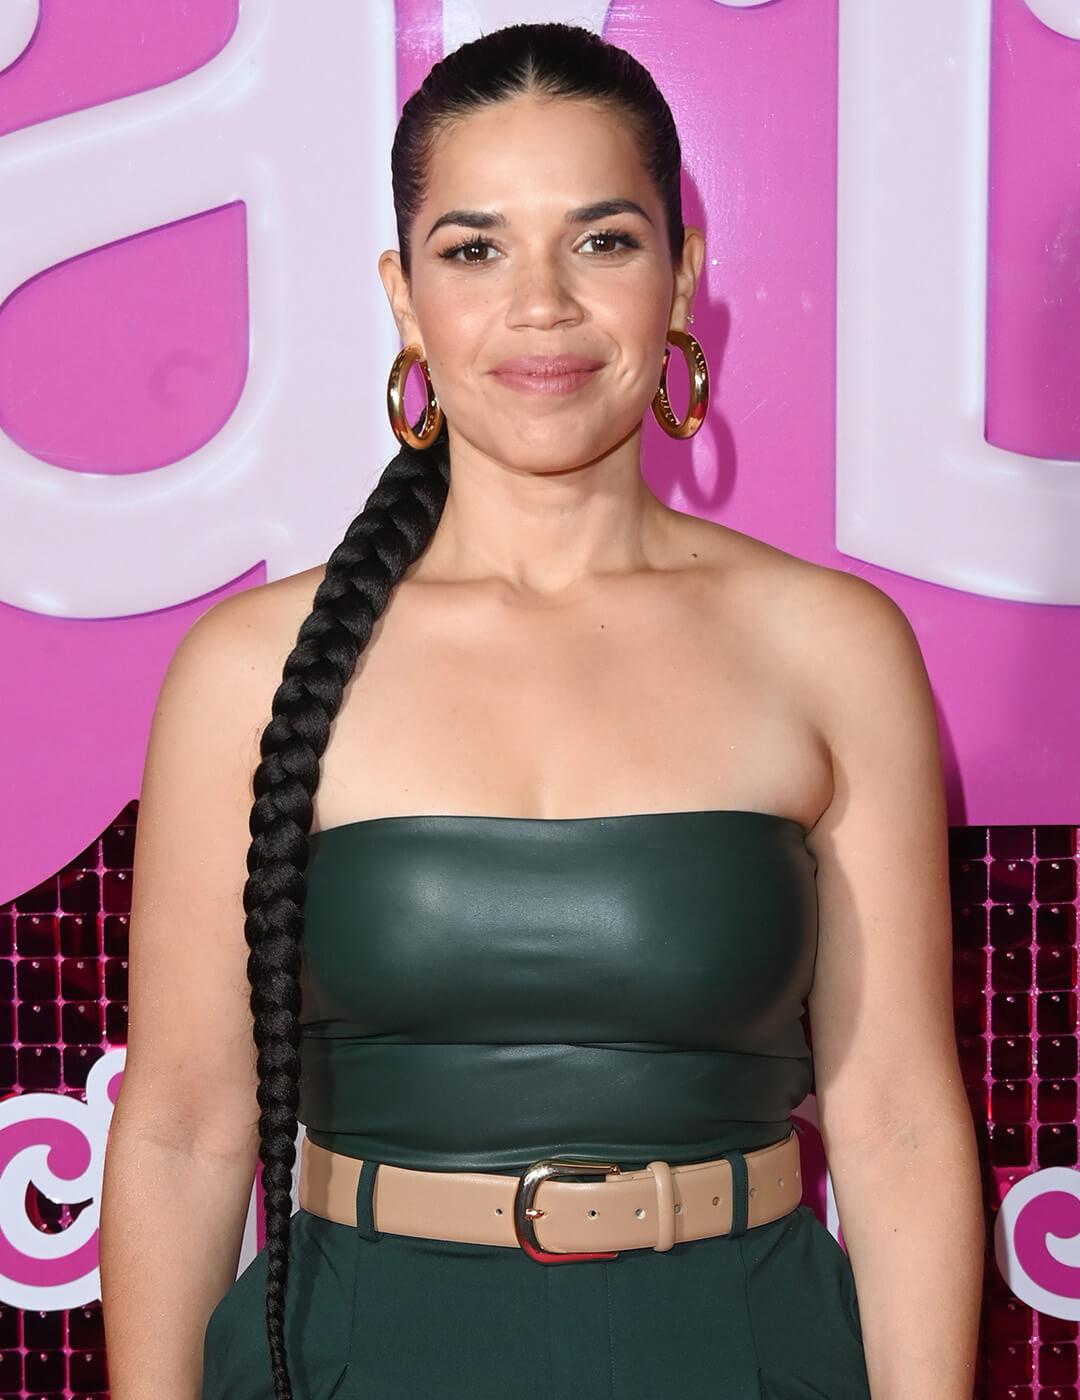 America Ferrera attends a photocall on July 13, 2023 in London, England.